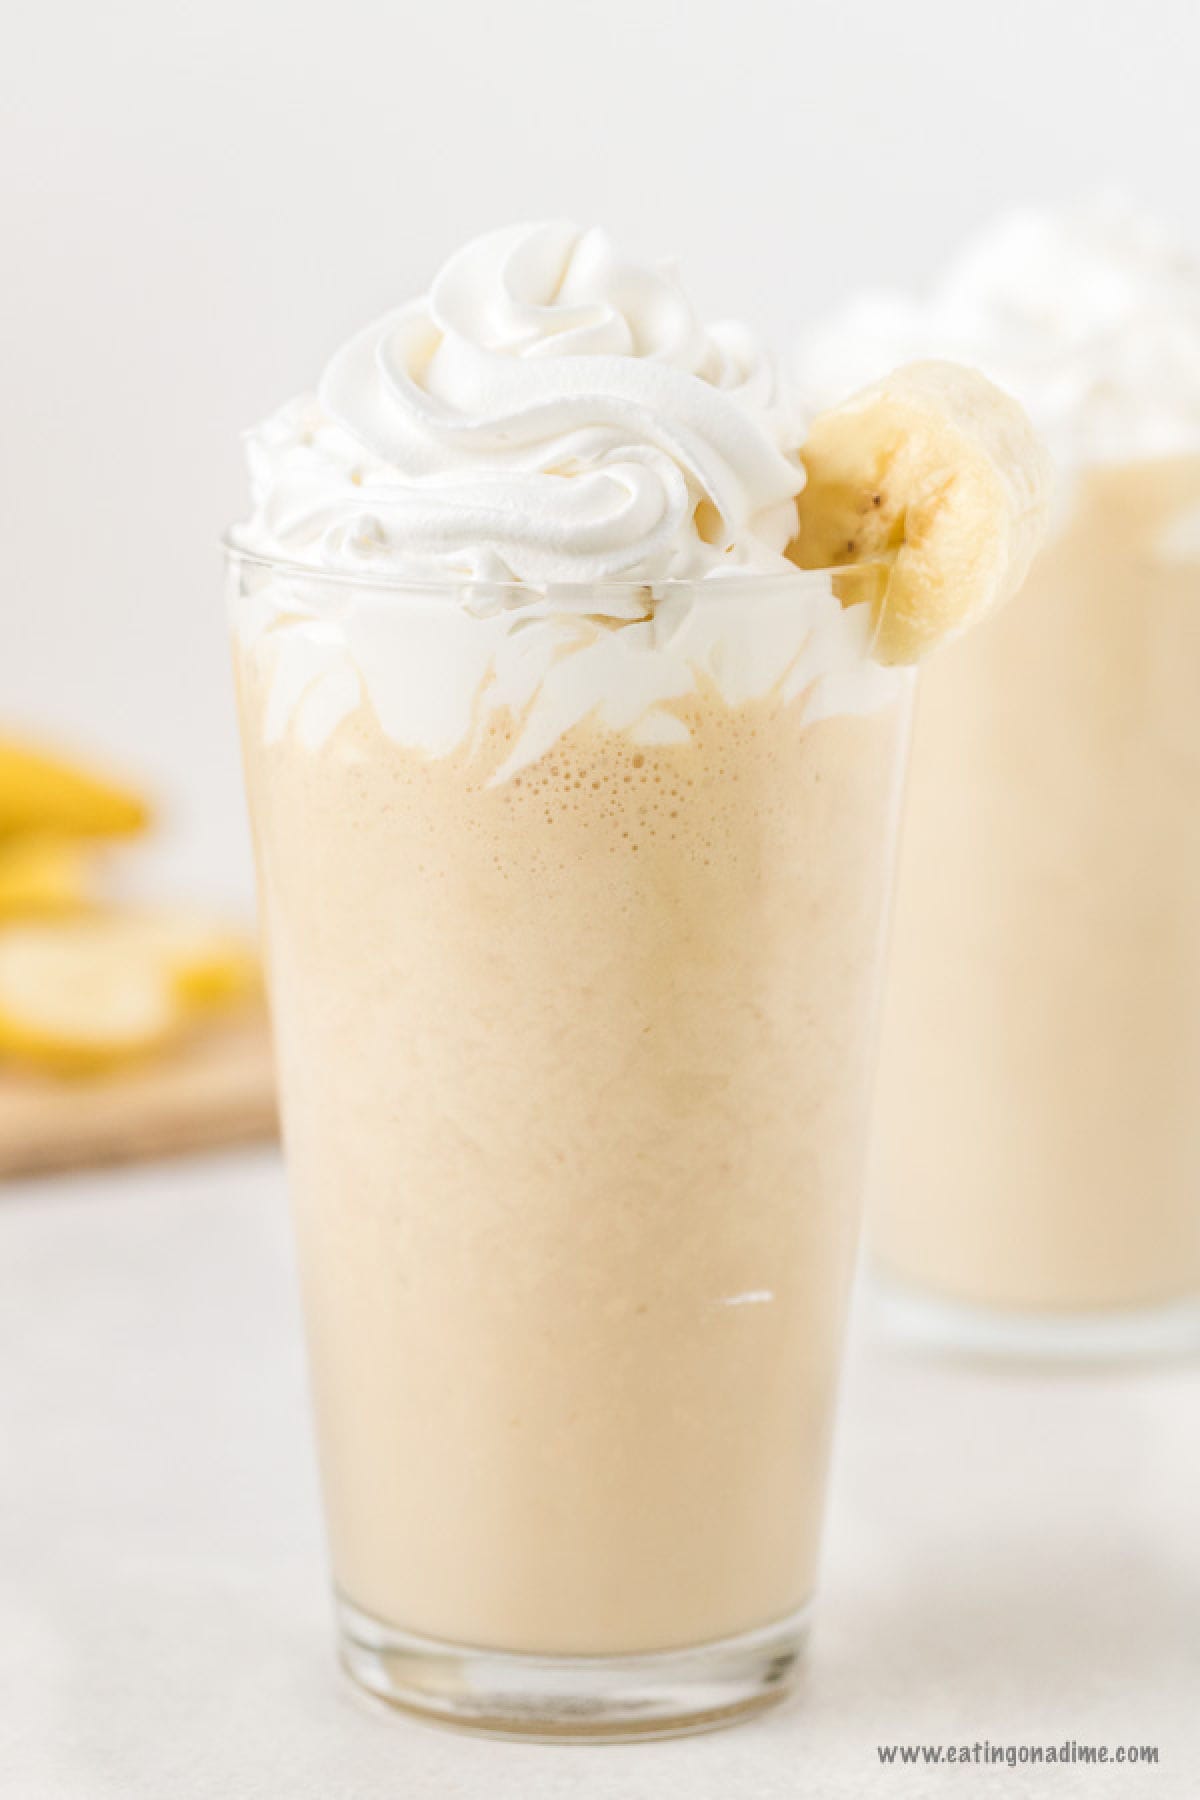 Peanut Butter Banana Smoothie in a glass topped with whipped cream and banana slices